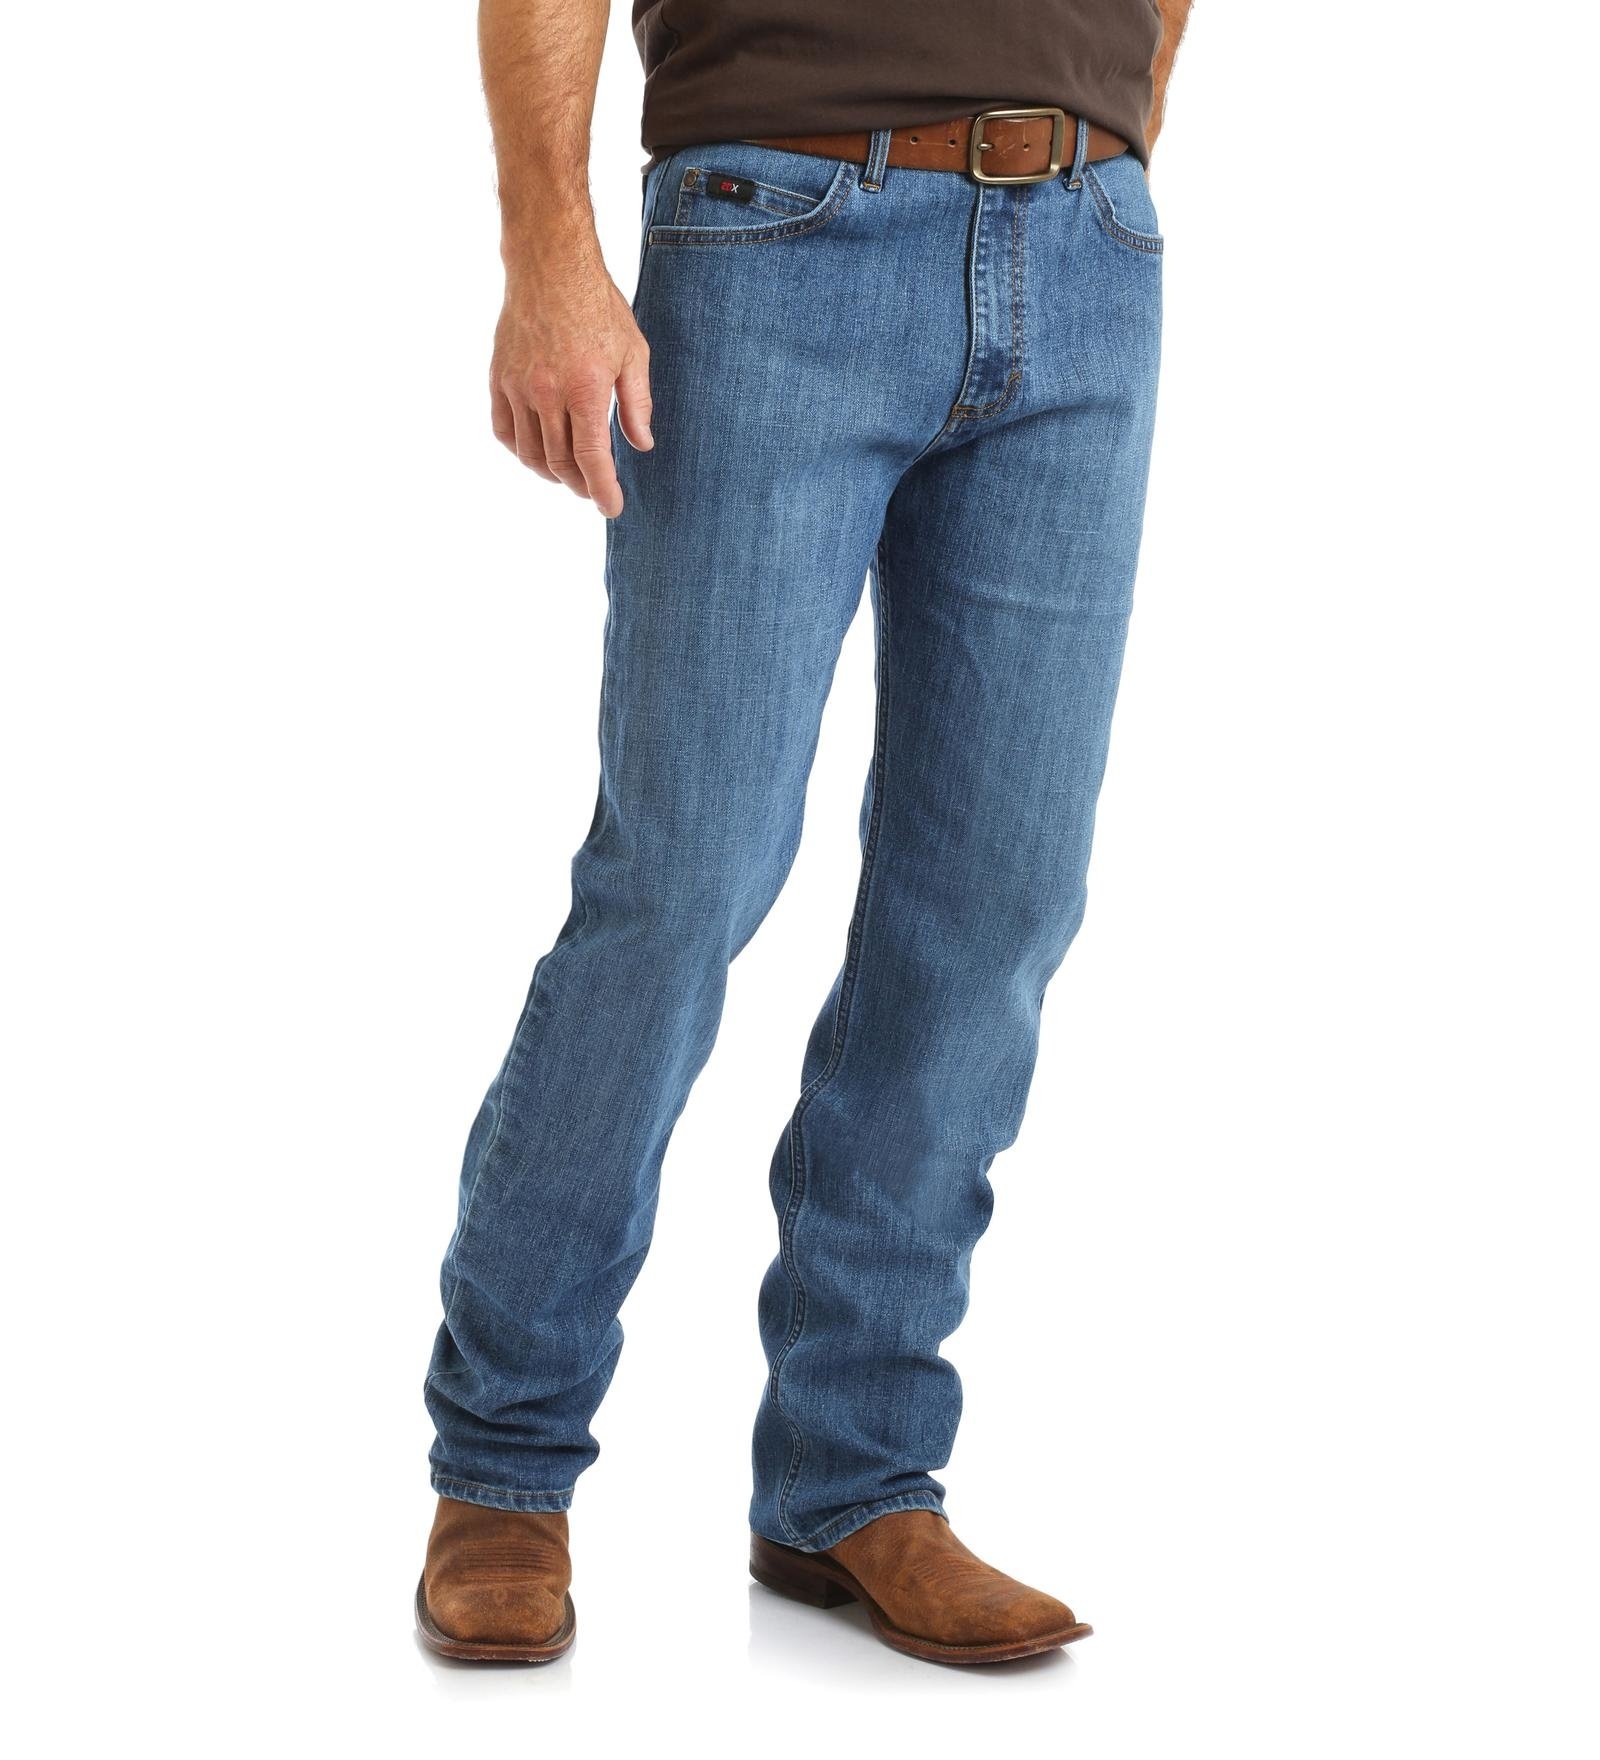 Wrangler Men's 01 Competition Relaxed Fit Jean, Barrel, 30x36 : :  Clothing & Accessories